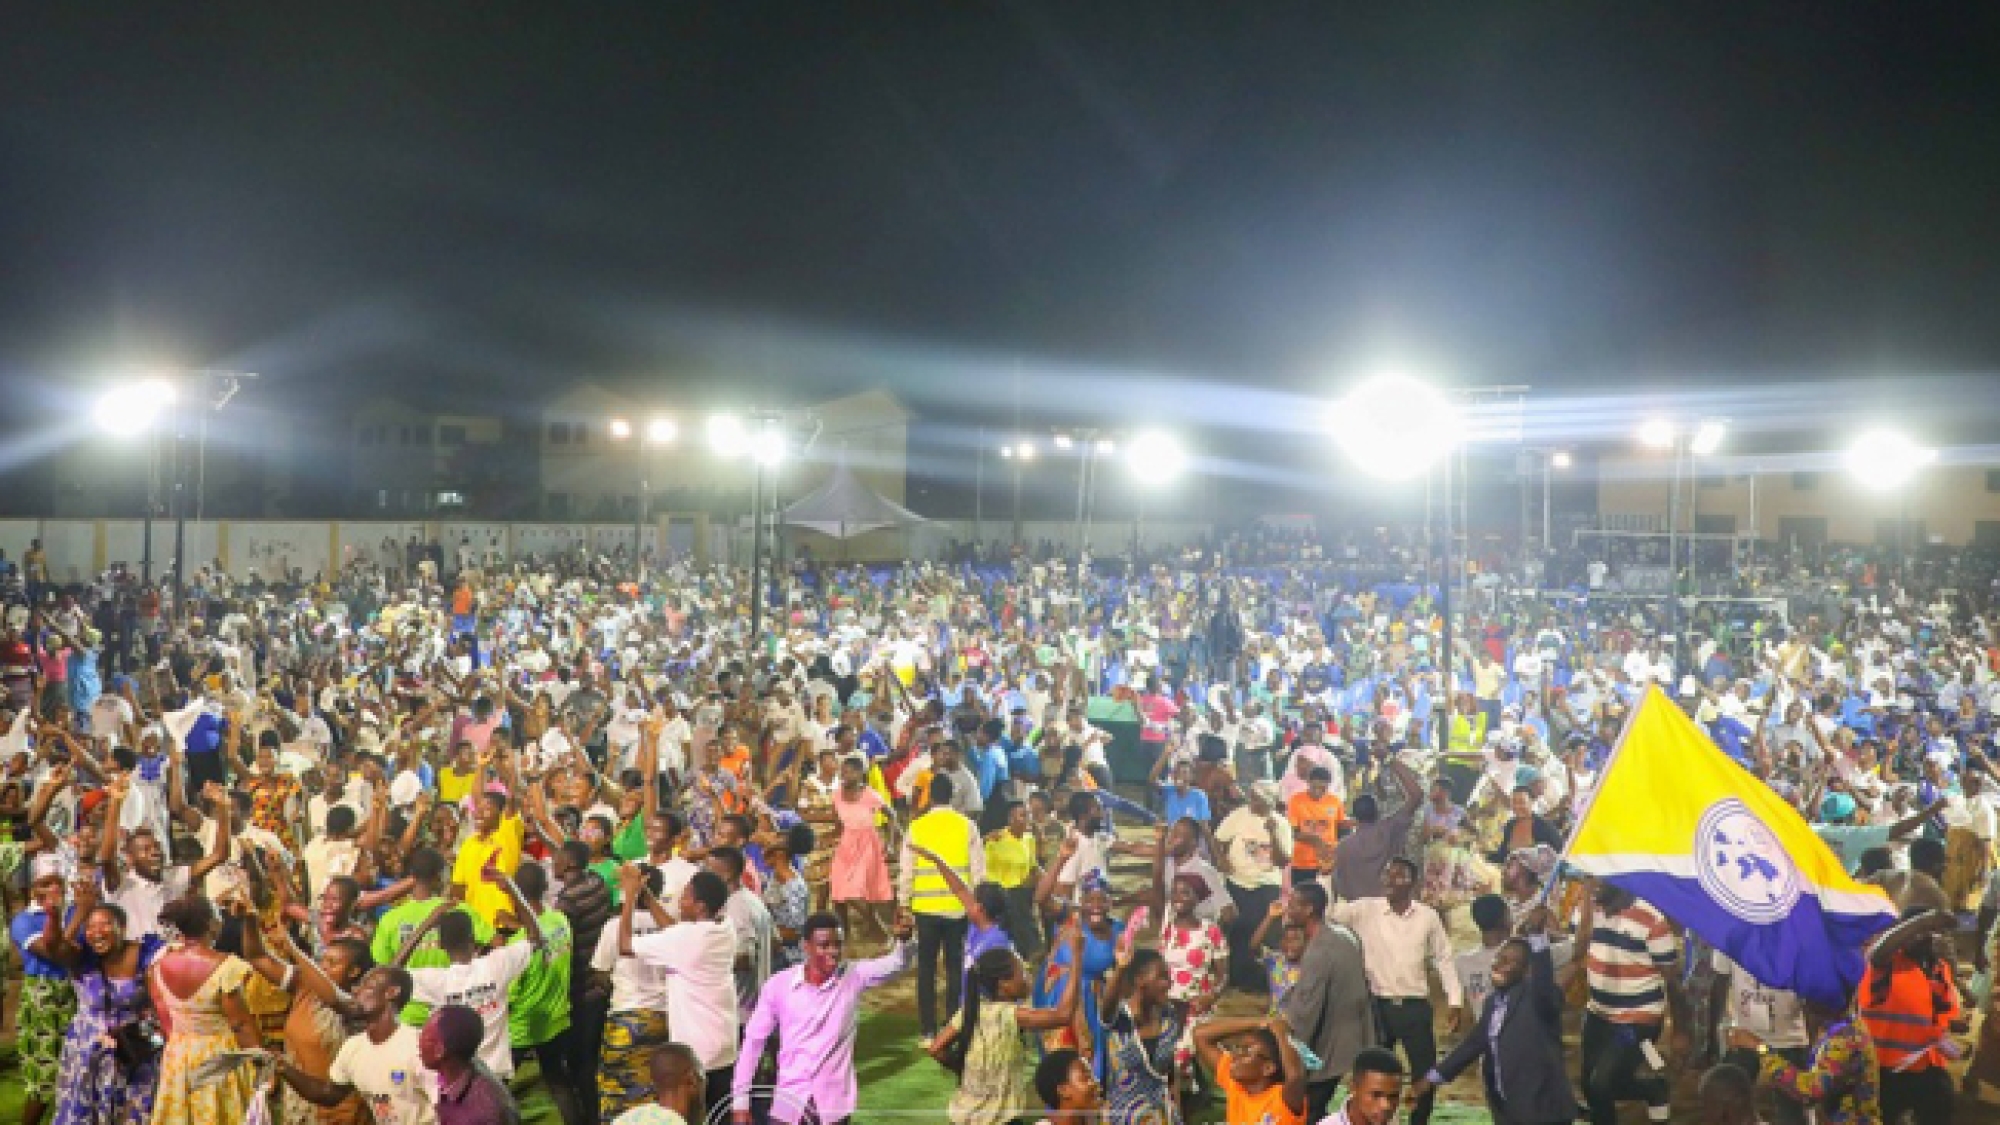 Thousands Surrender To Christ During “Aflao For Christ” Crusade web